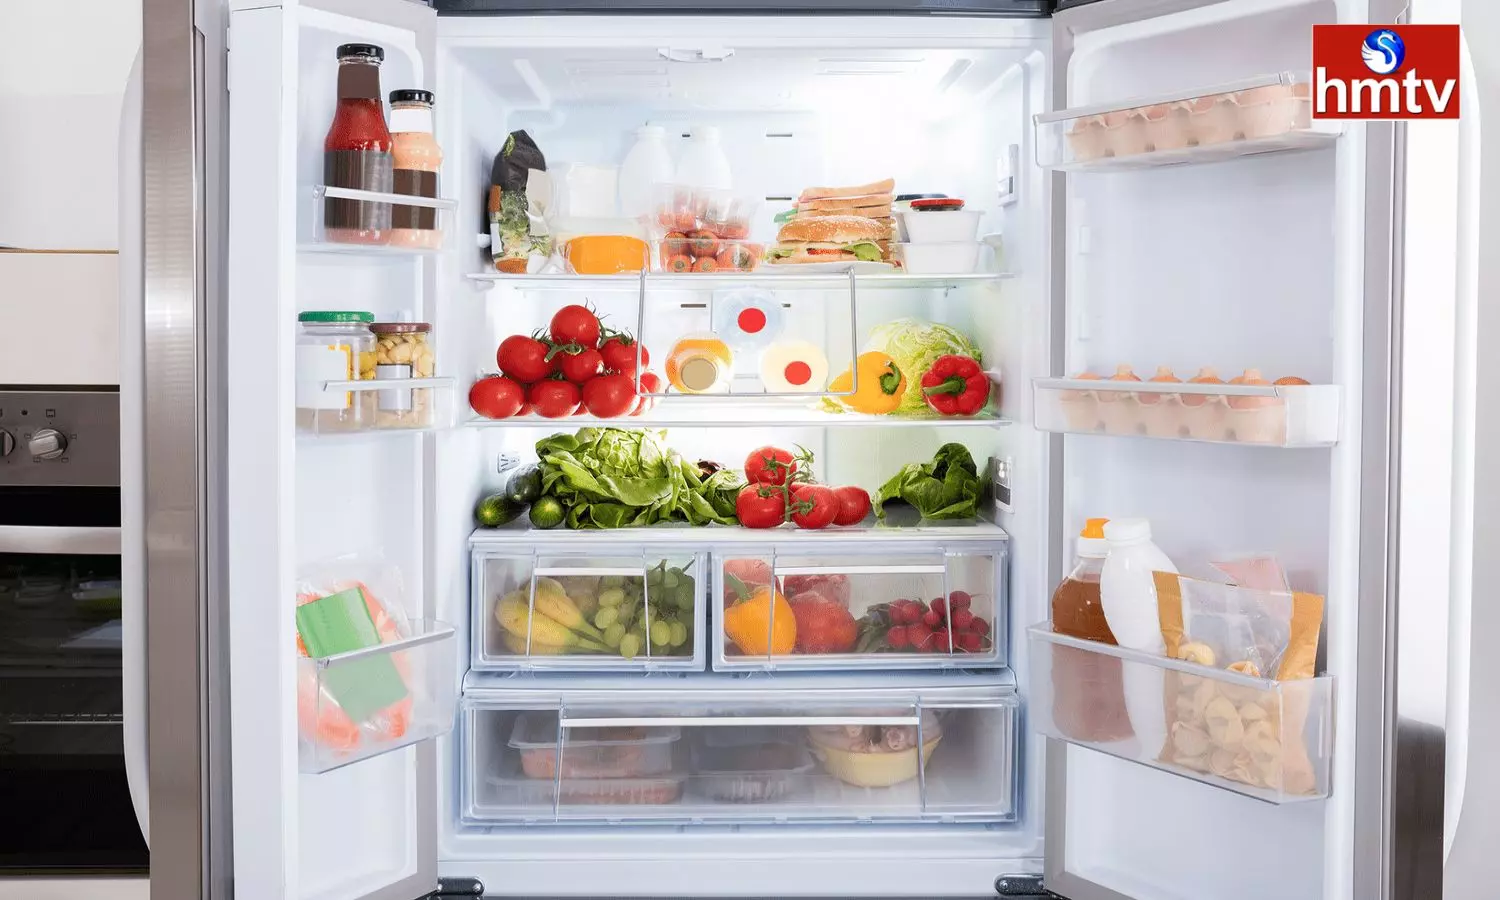 Do Not Store These Items In The Fridge At All Very Dangerous To Health